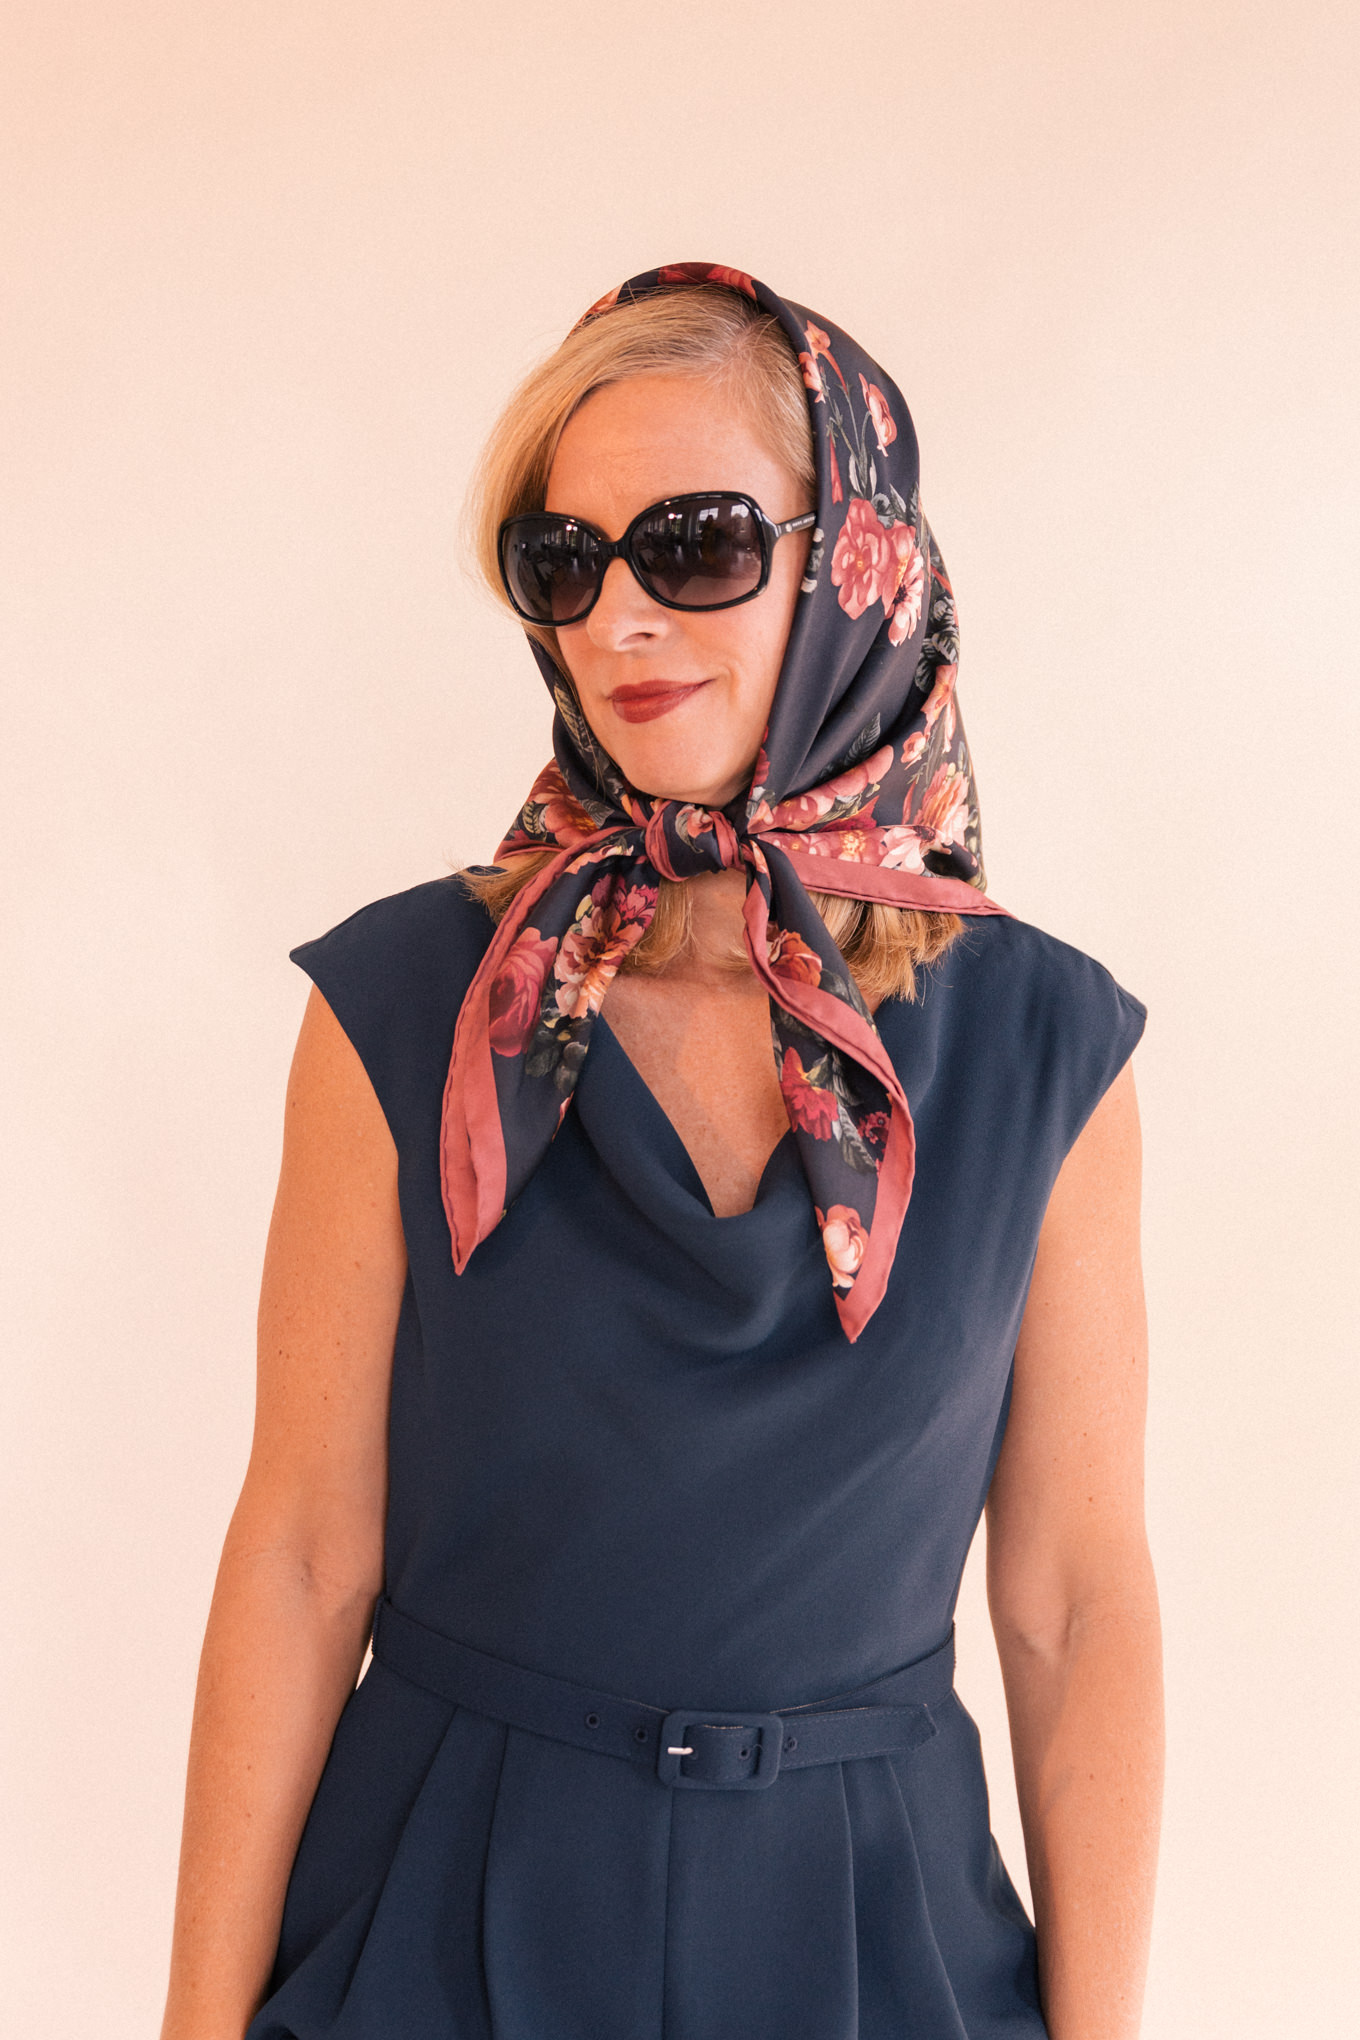 6 Ways To Wear Scarves In Your Hair Gal Meets Glam